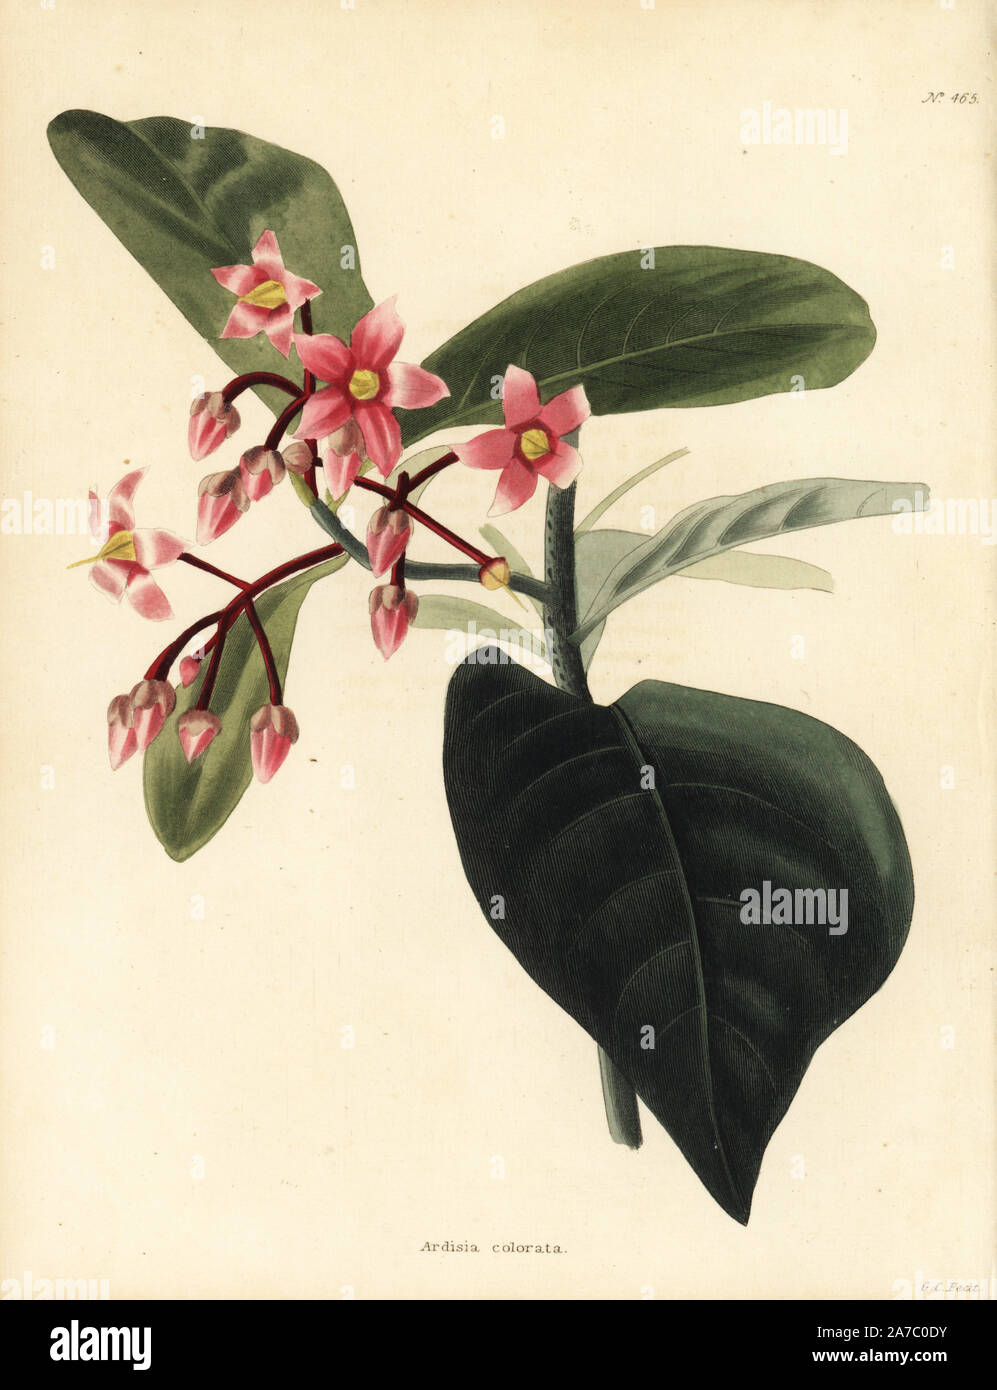 Coralberry tree, Ardisia colorata. Handcoloured copperplate engraving by George Cooke from Conrad Loddiges' Botanical Cabinet, London, 1810. Stock Photo